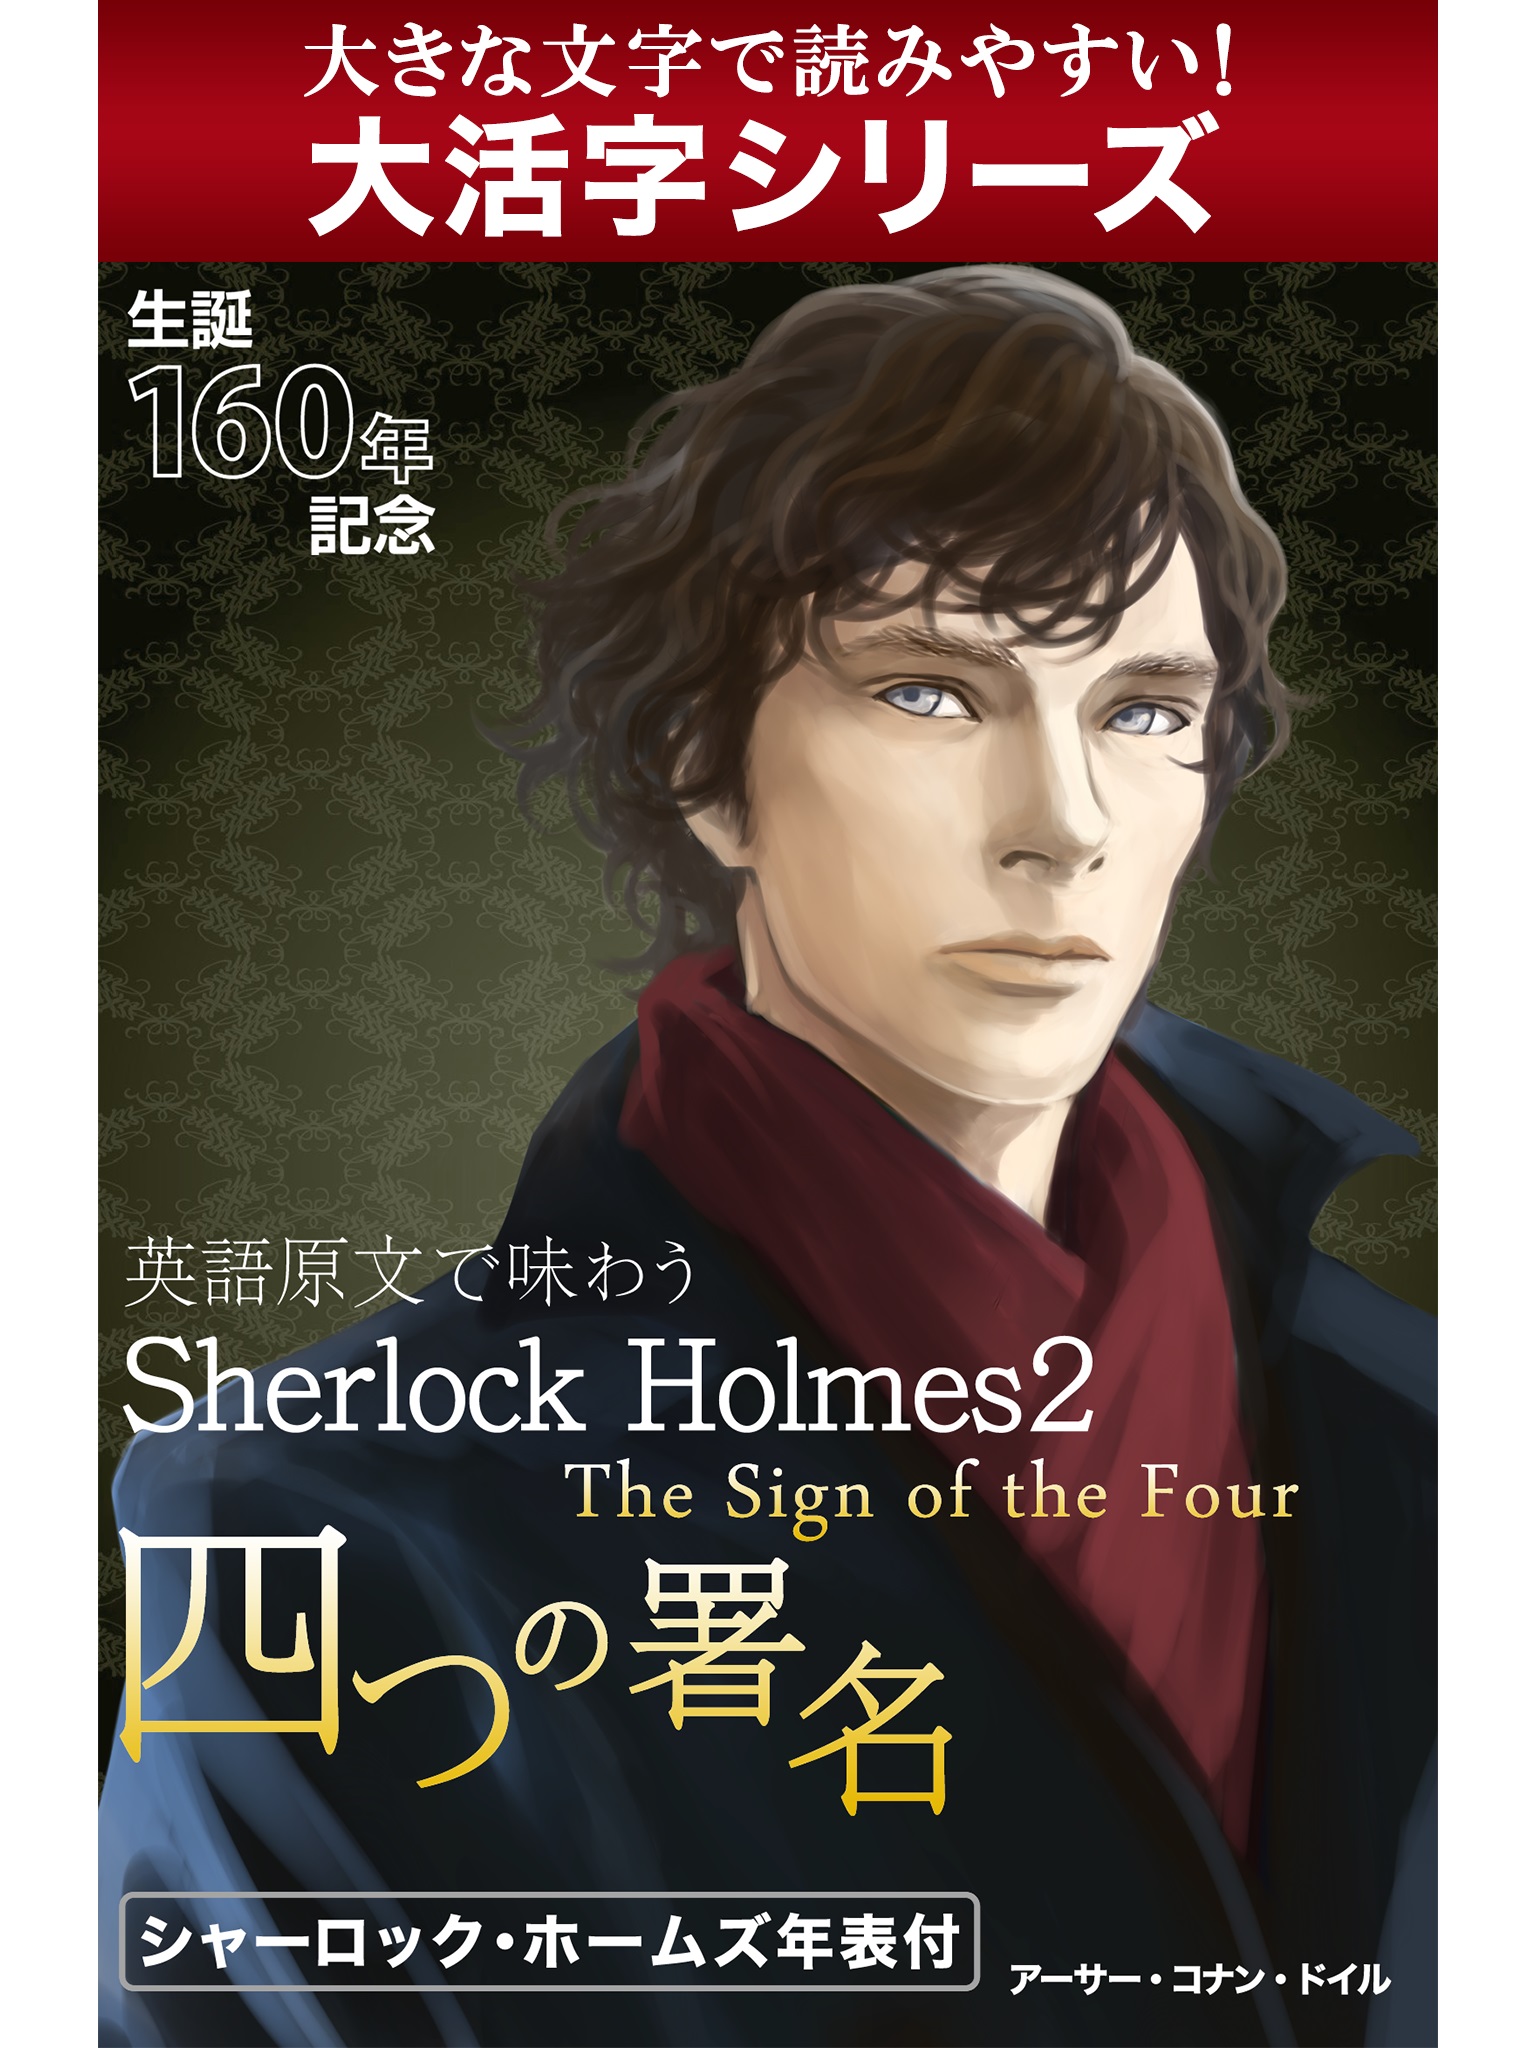 【android/kindle端末対応 大活字シリーズ】英語原文で味わうSherlock Holmes２　四つの署名／The Sign of the Four